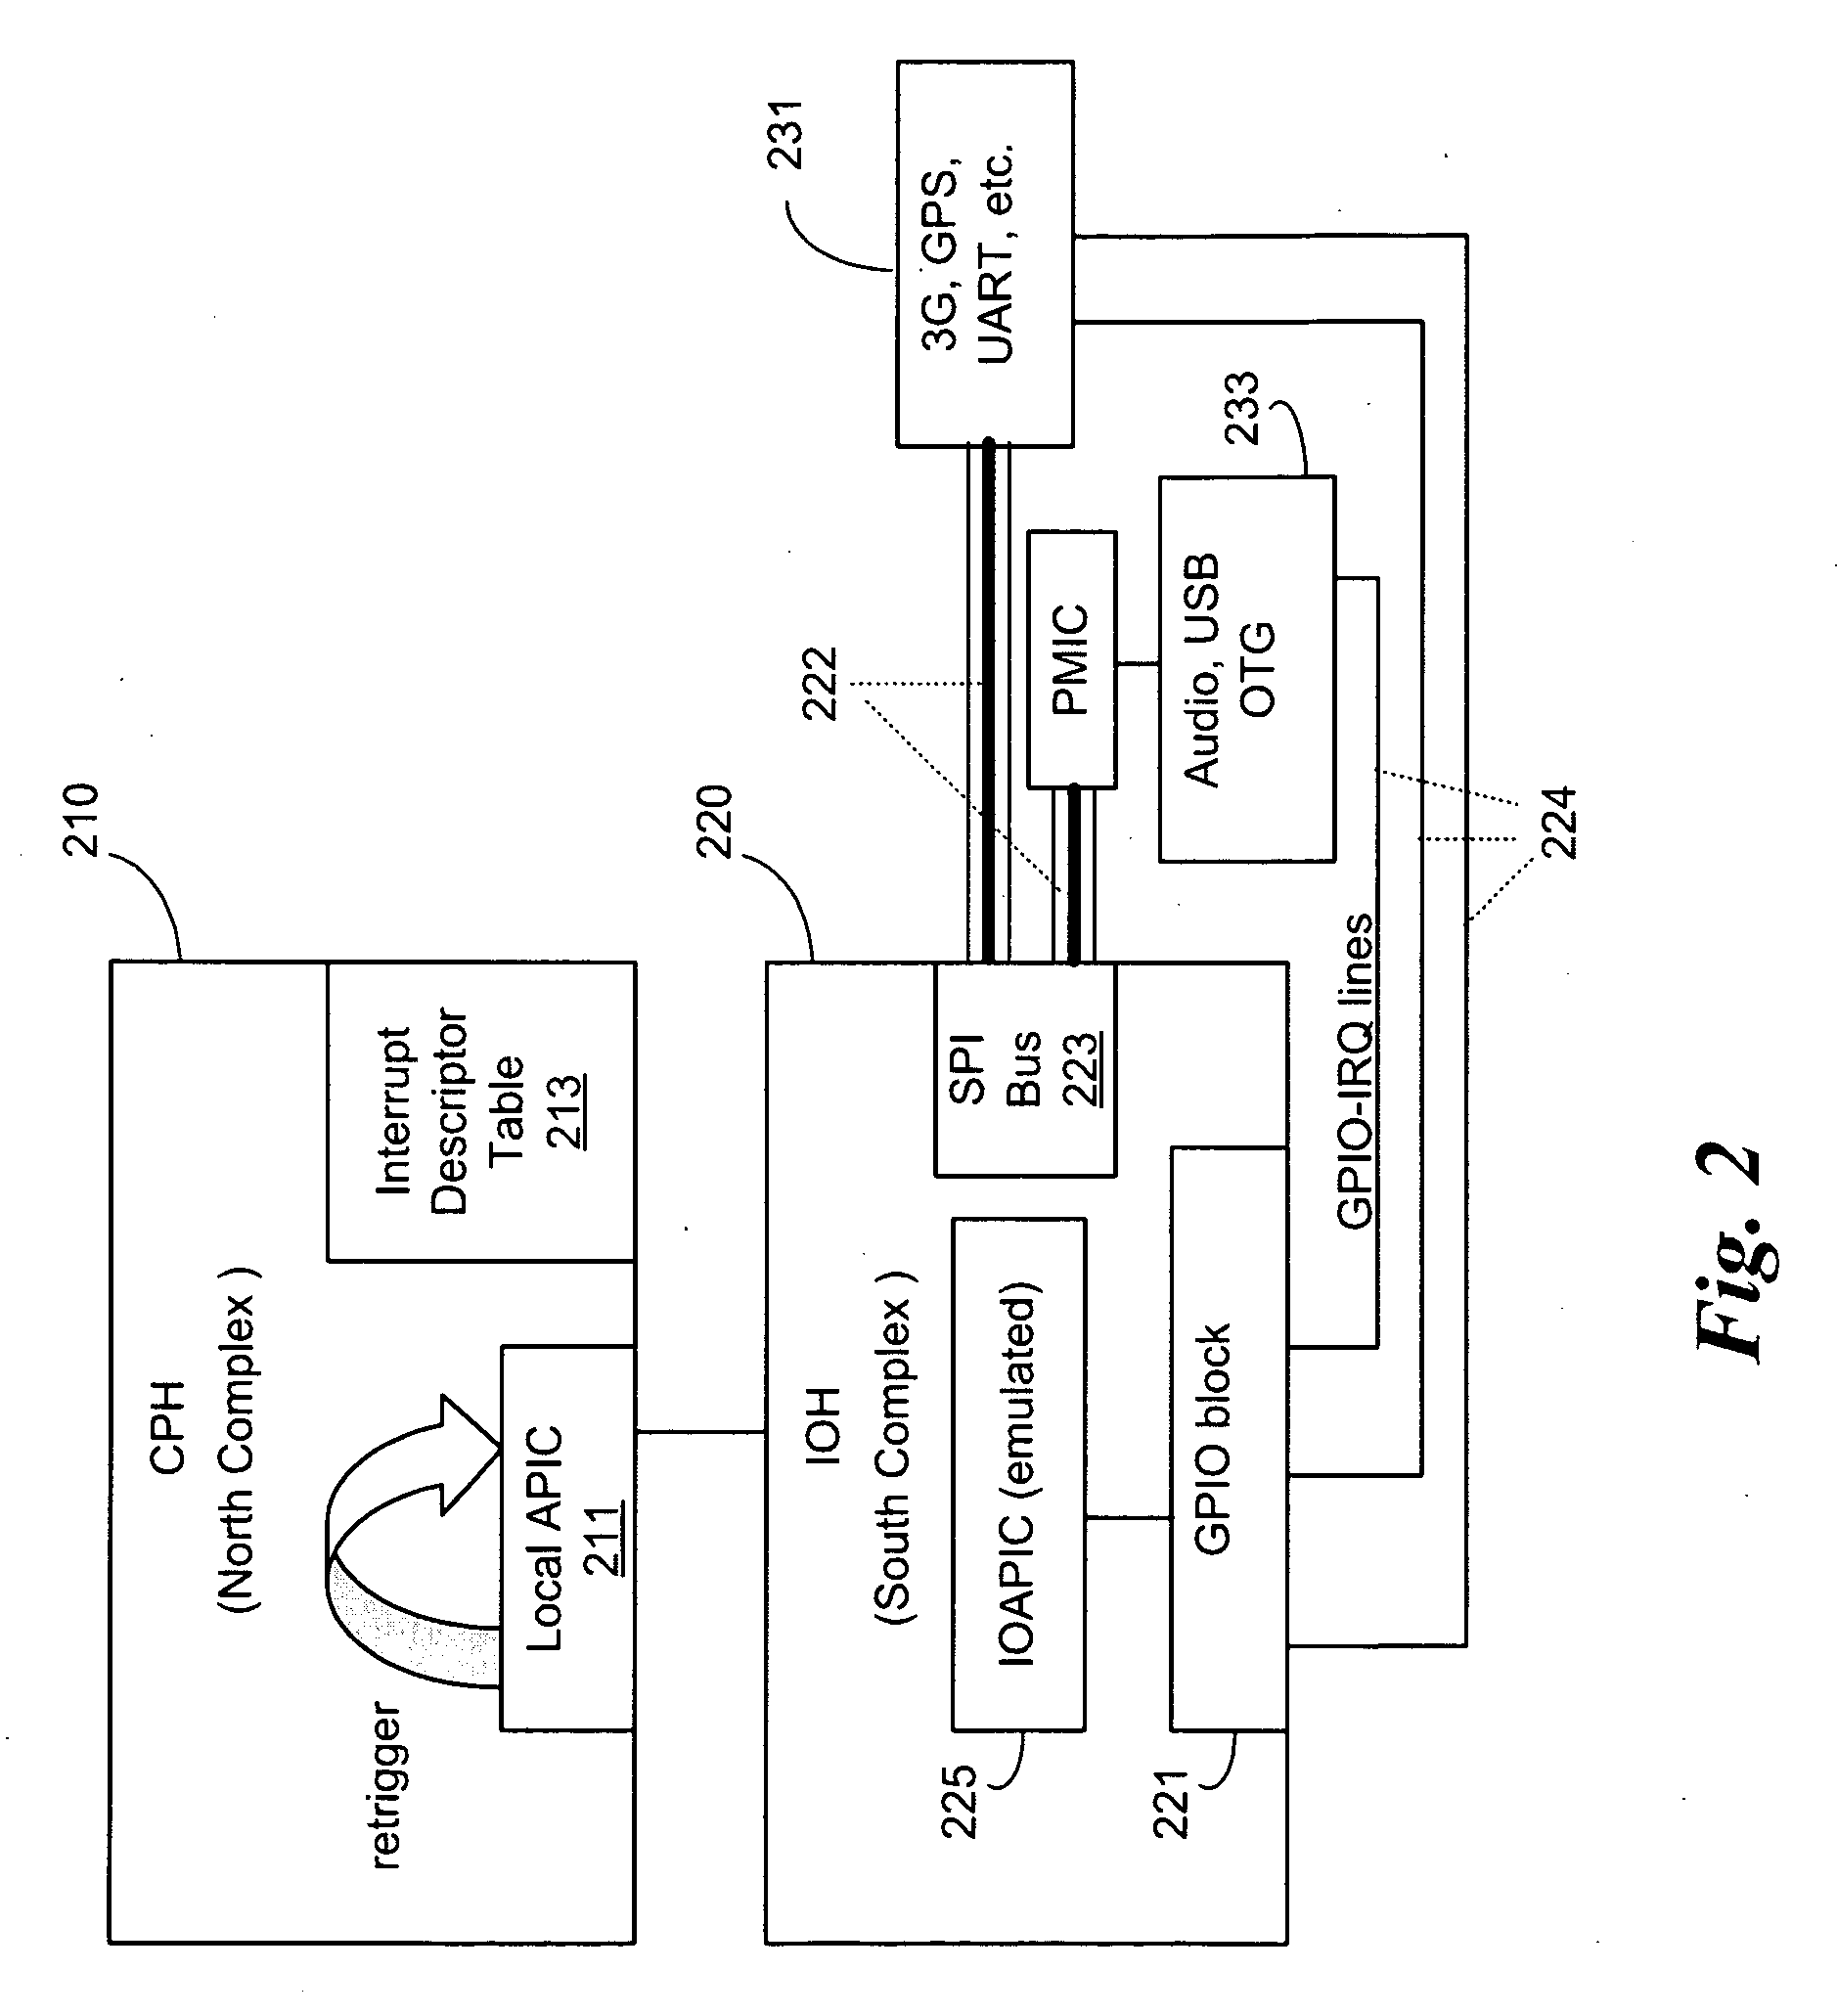 Dynamic, local retriggered interrupt routing discovery method